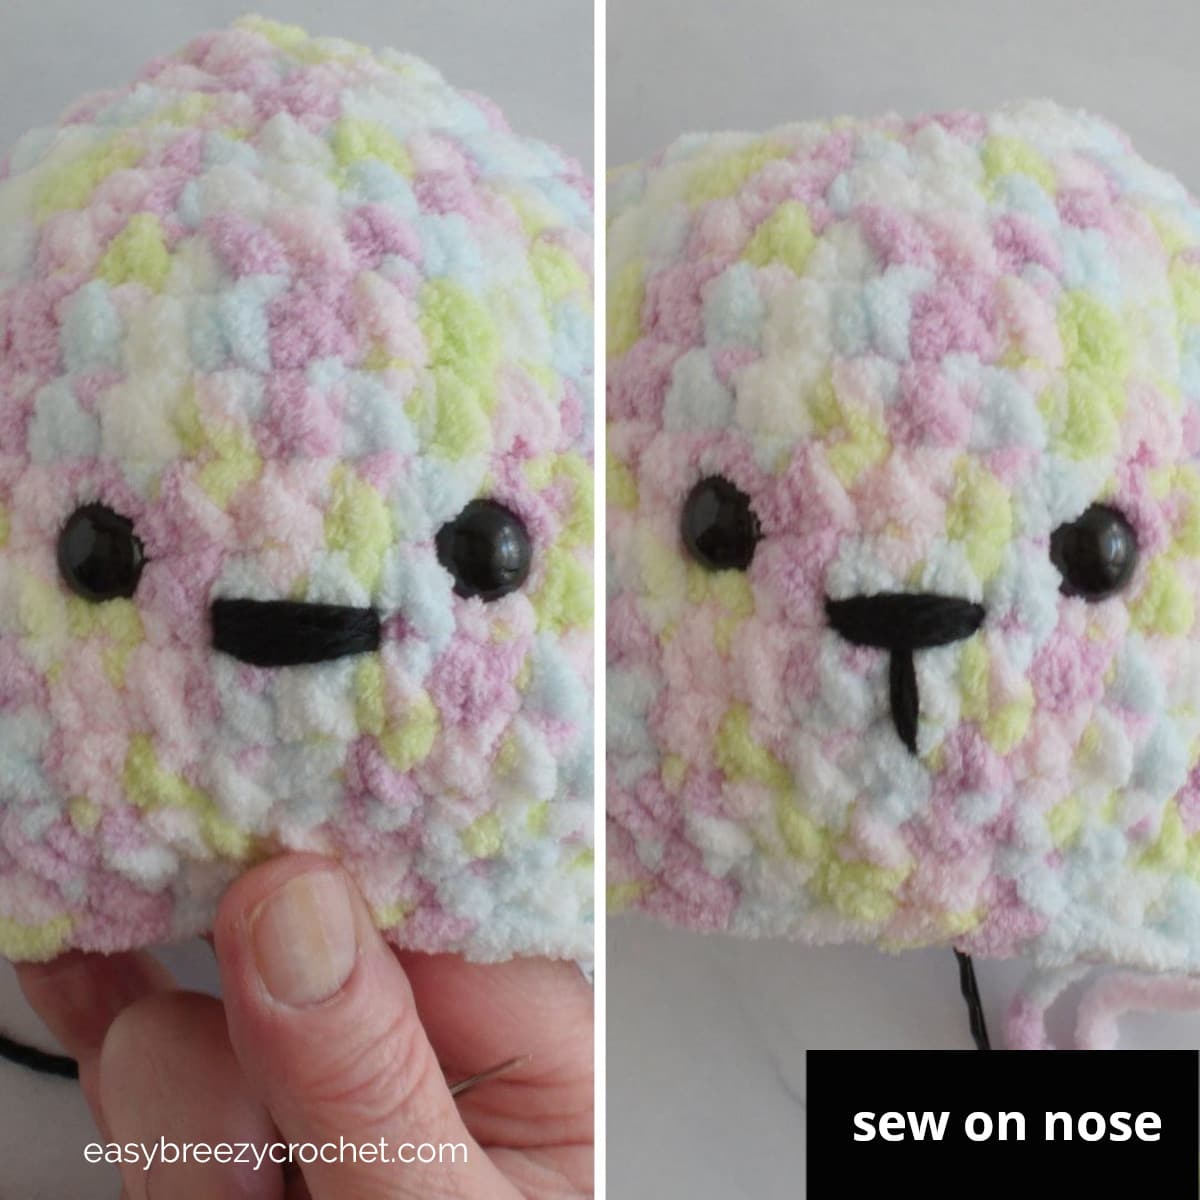 Image showing steps for sewing a bunny nose.